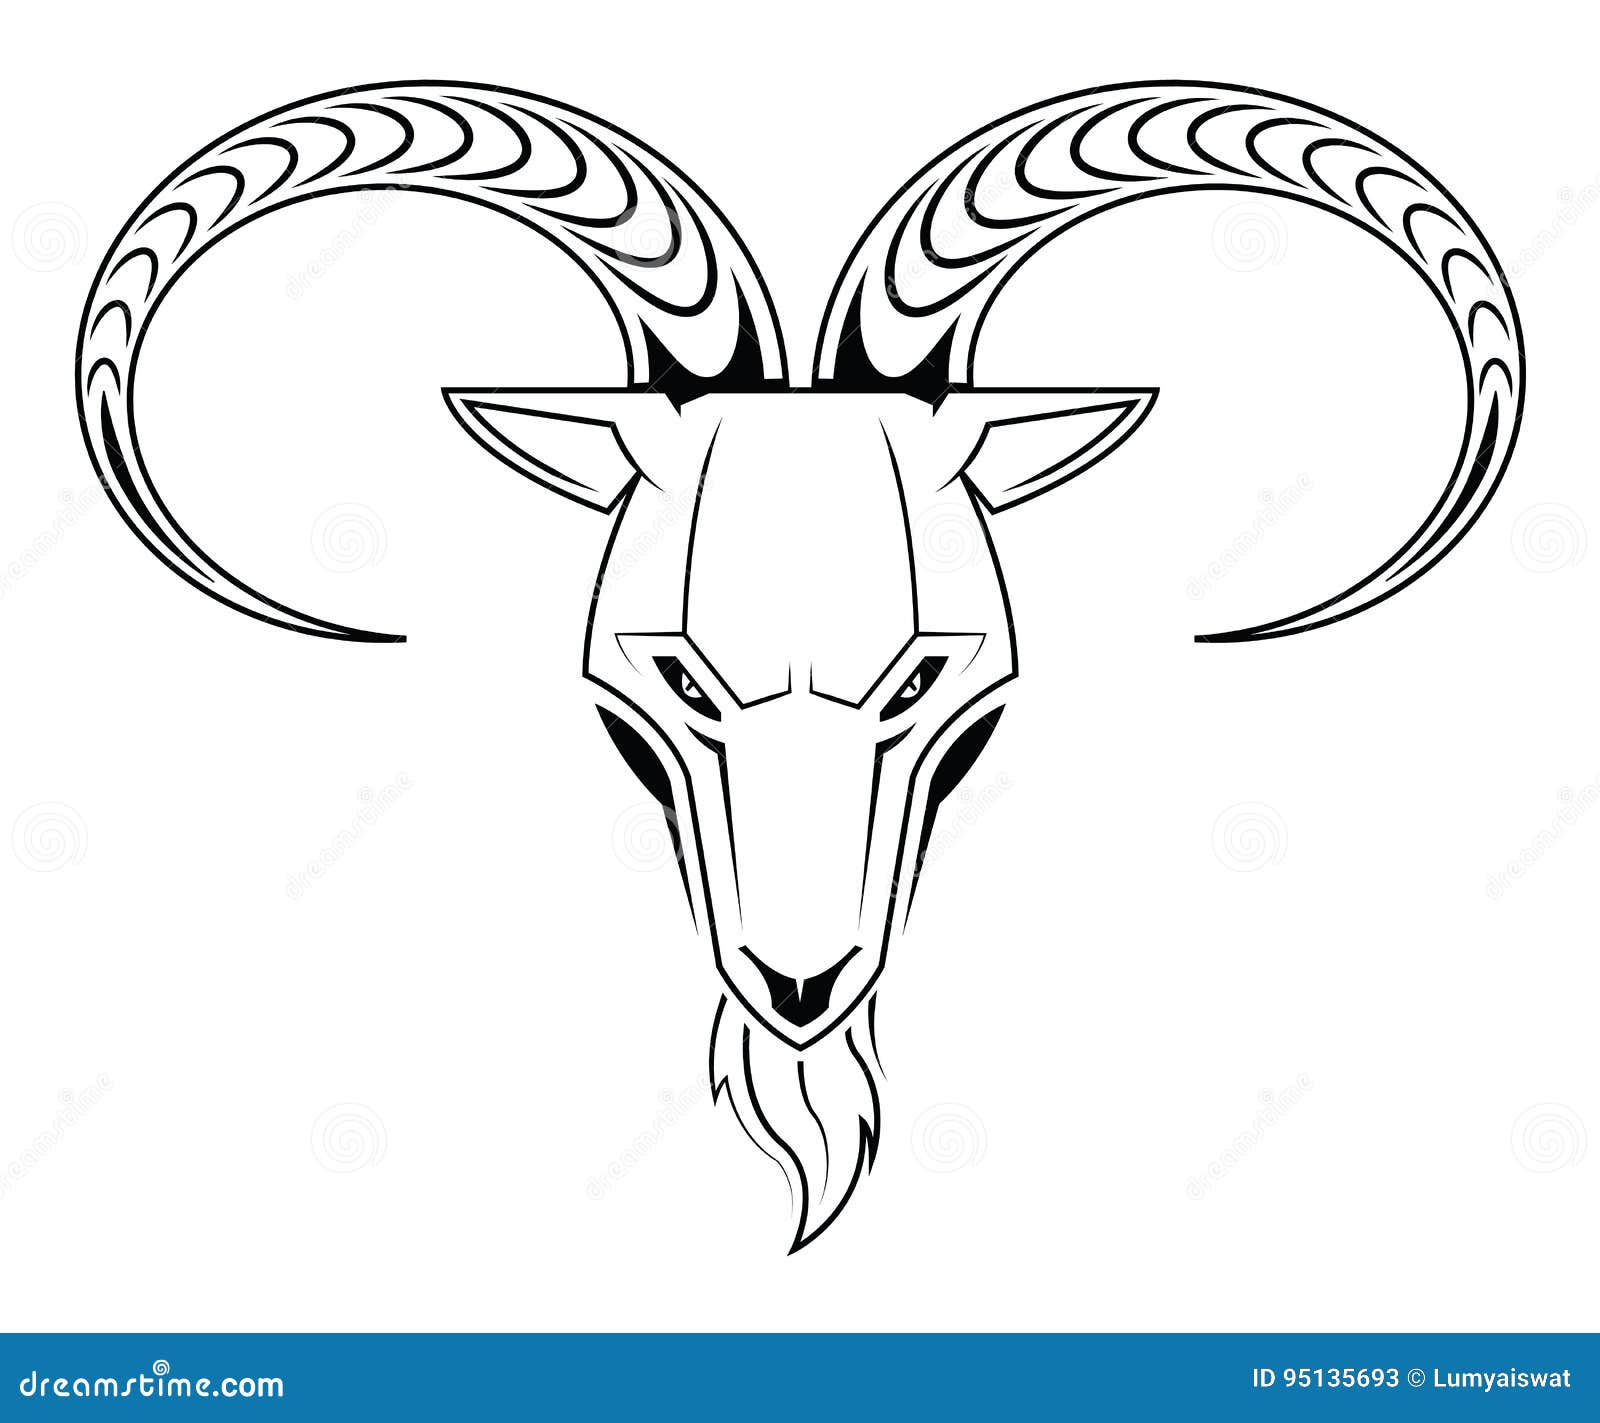 Goat`s Head Isolated on White. Stock Vector - Illustration of goats ...